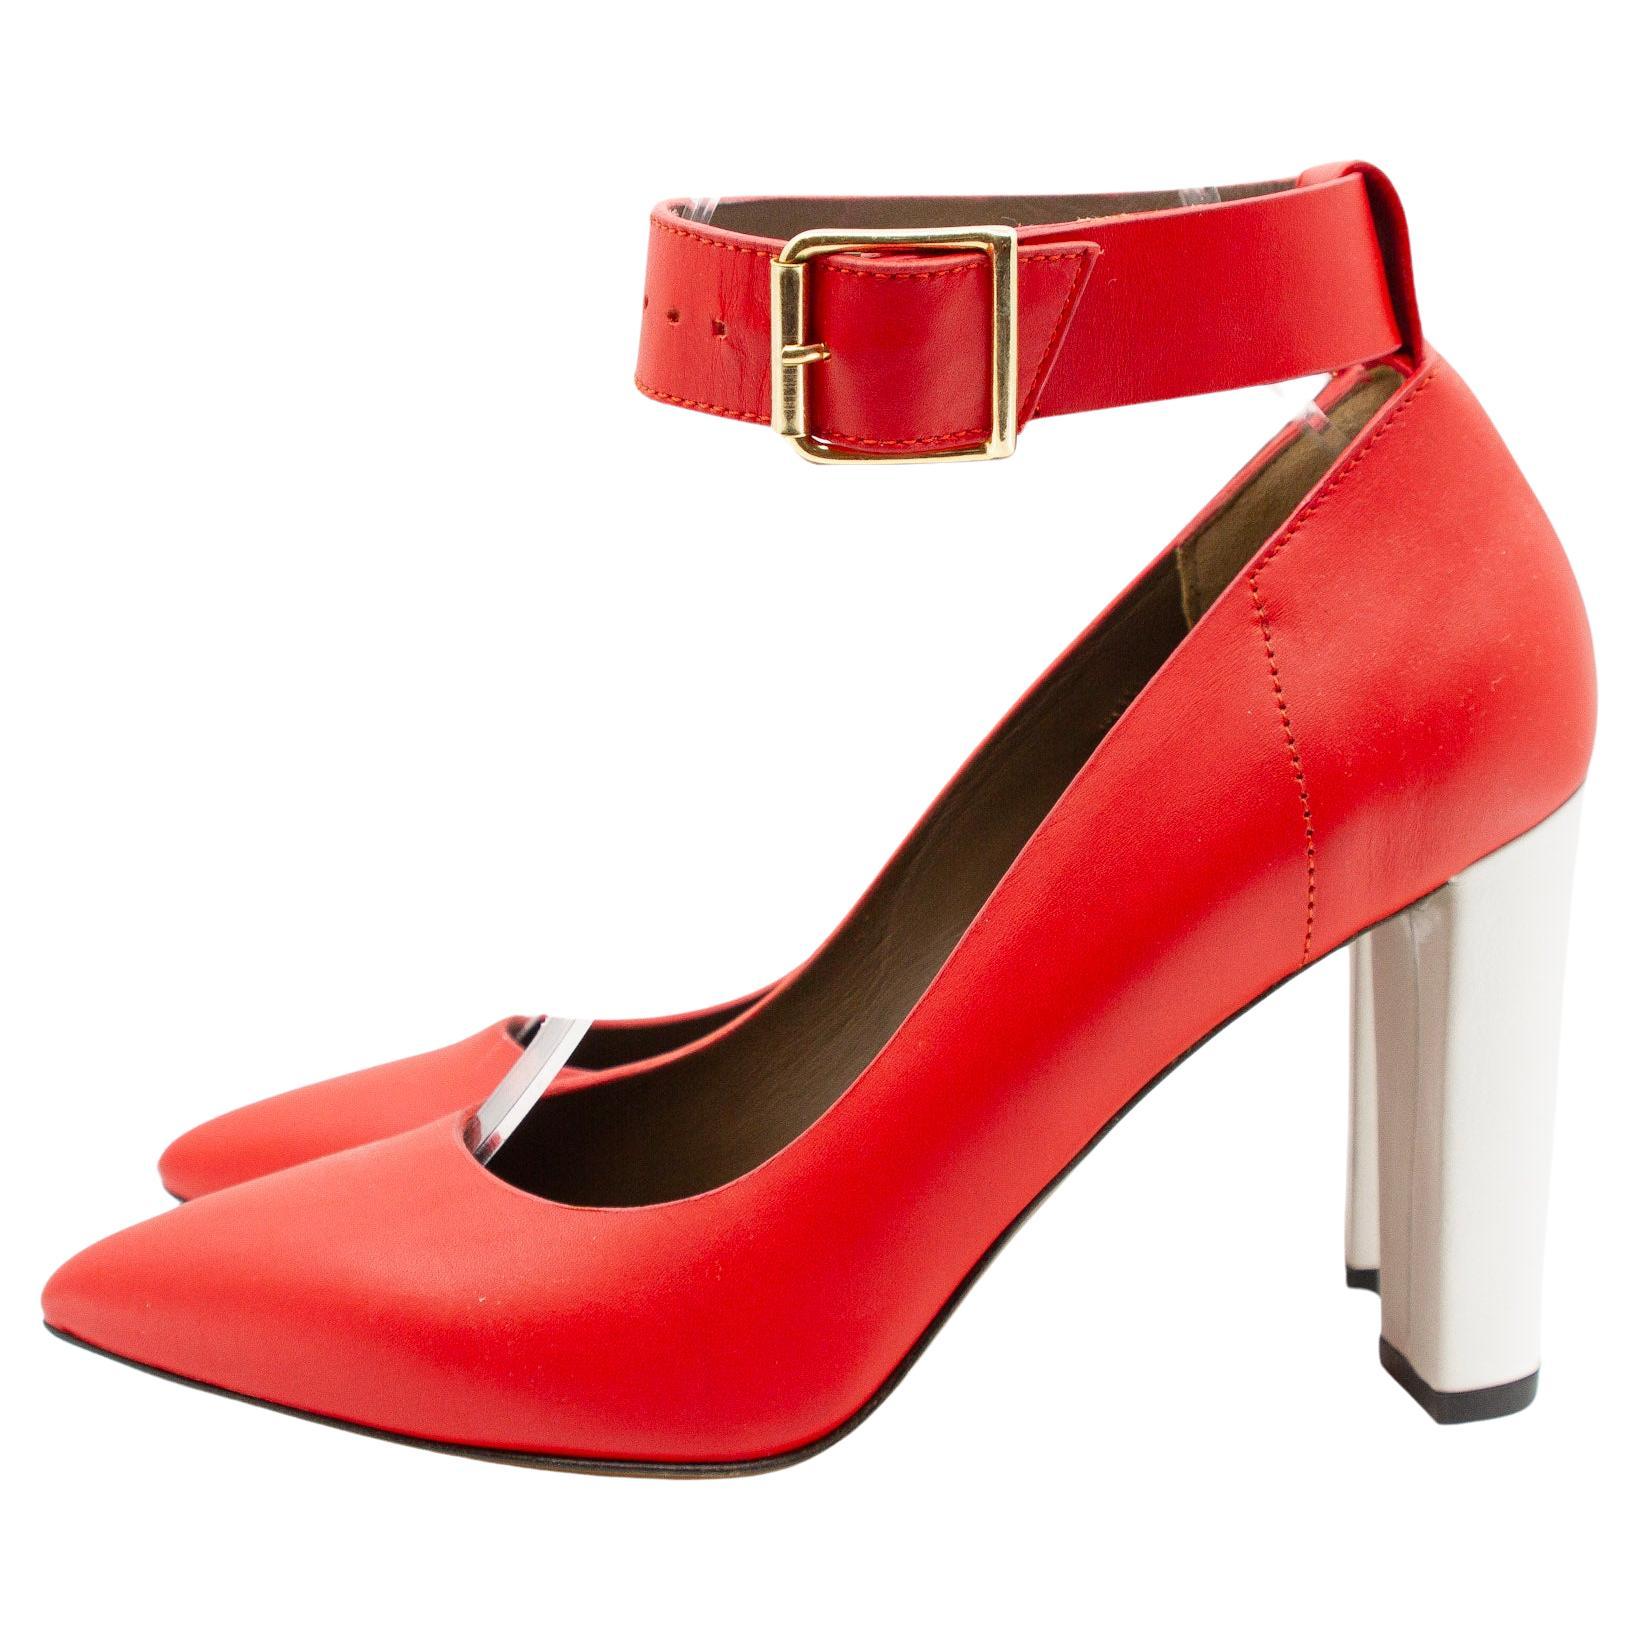 Marni's Cherry Red Pumps For Sale